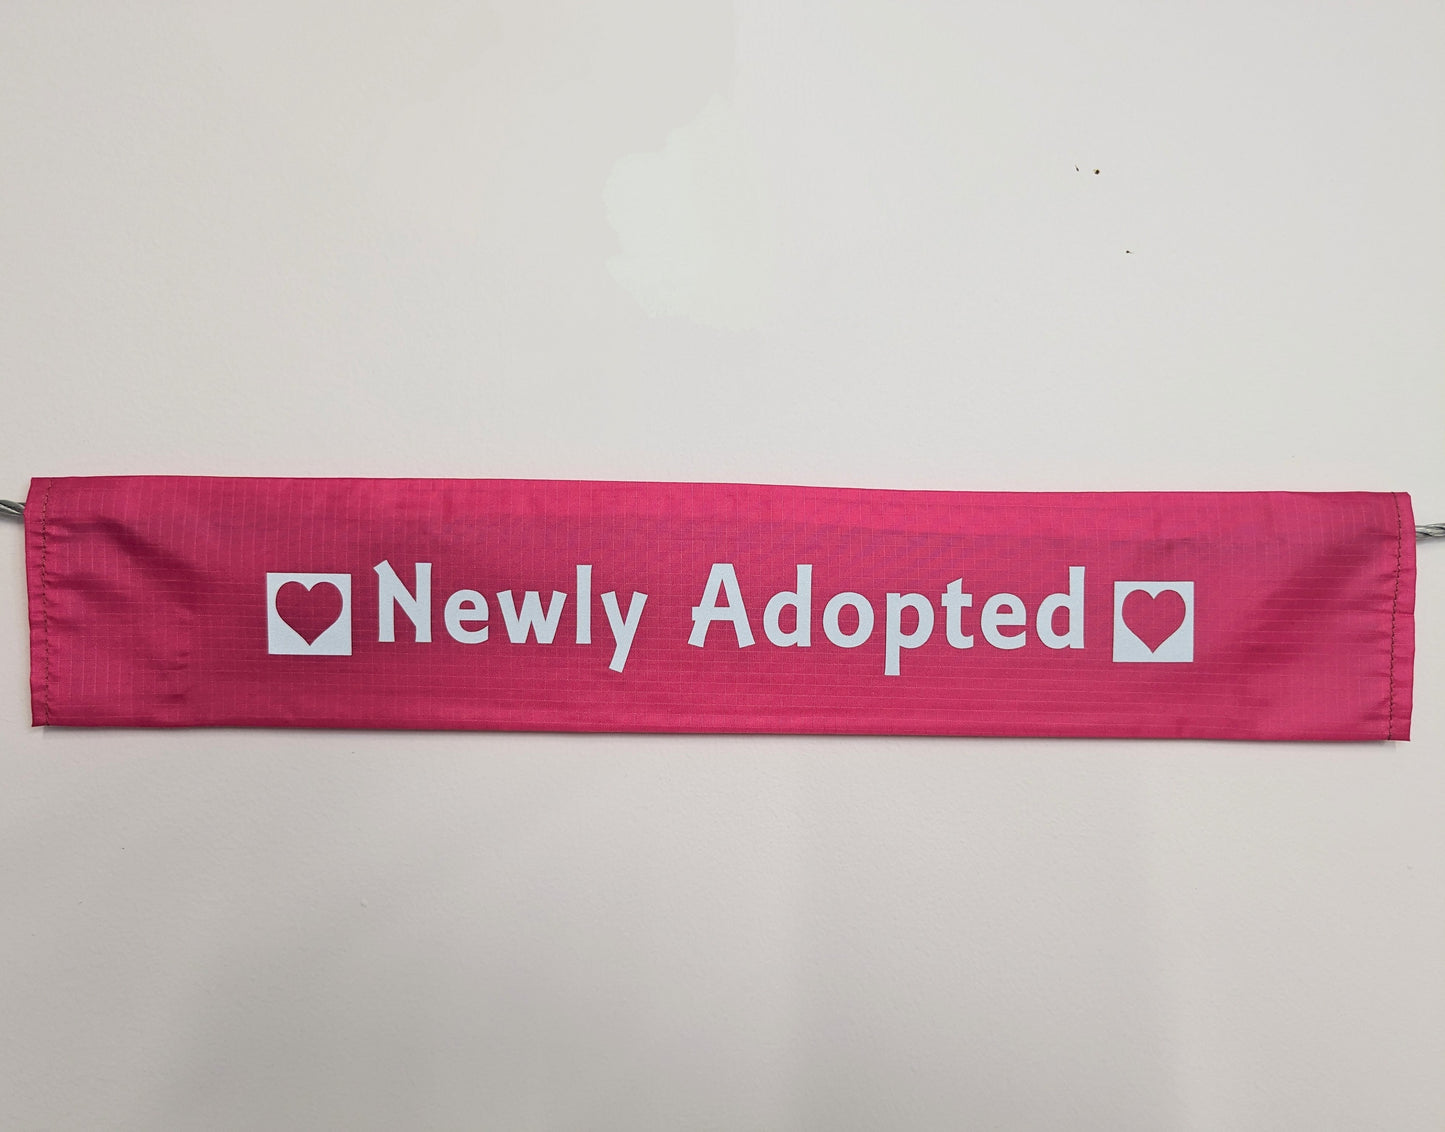 "NEWLY ADOPTED"  Dog lead sleeve / cover in PINK. For dog leash - canine training - puppy socialising - reactive dog - support dog